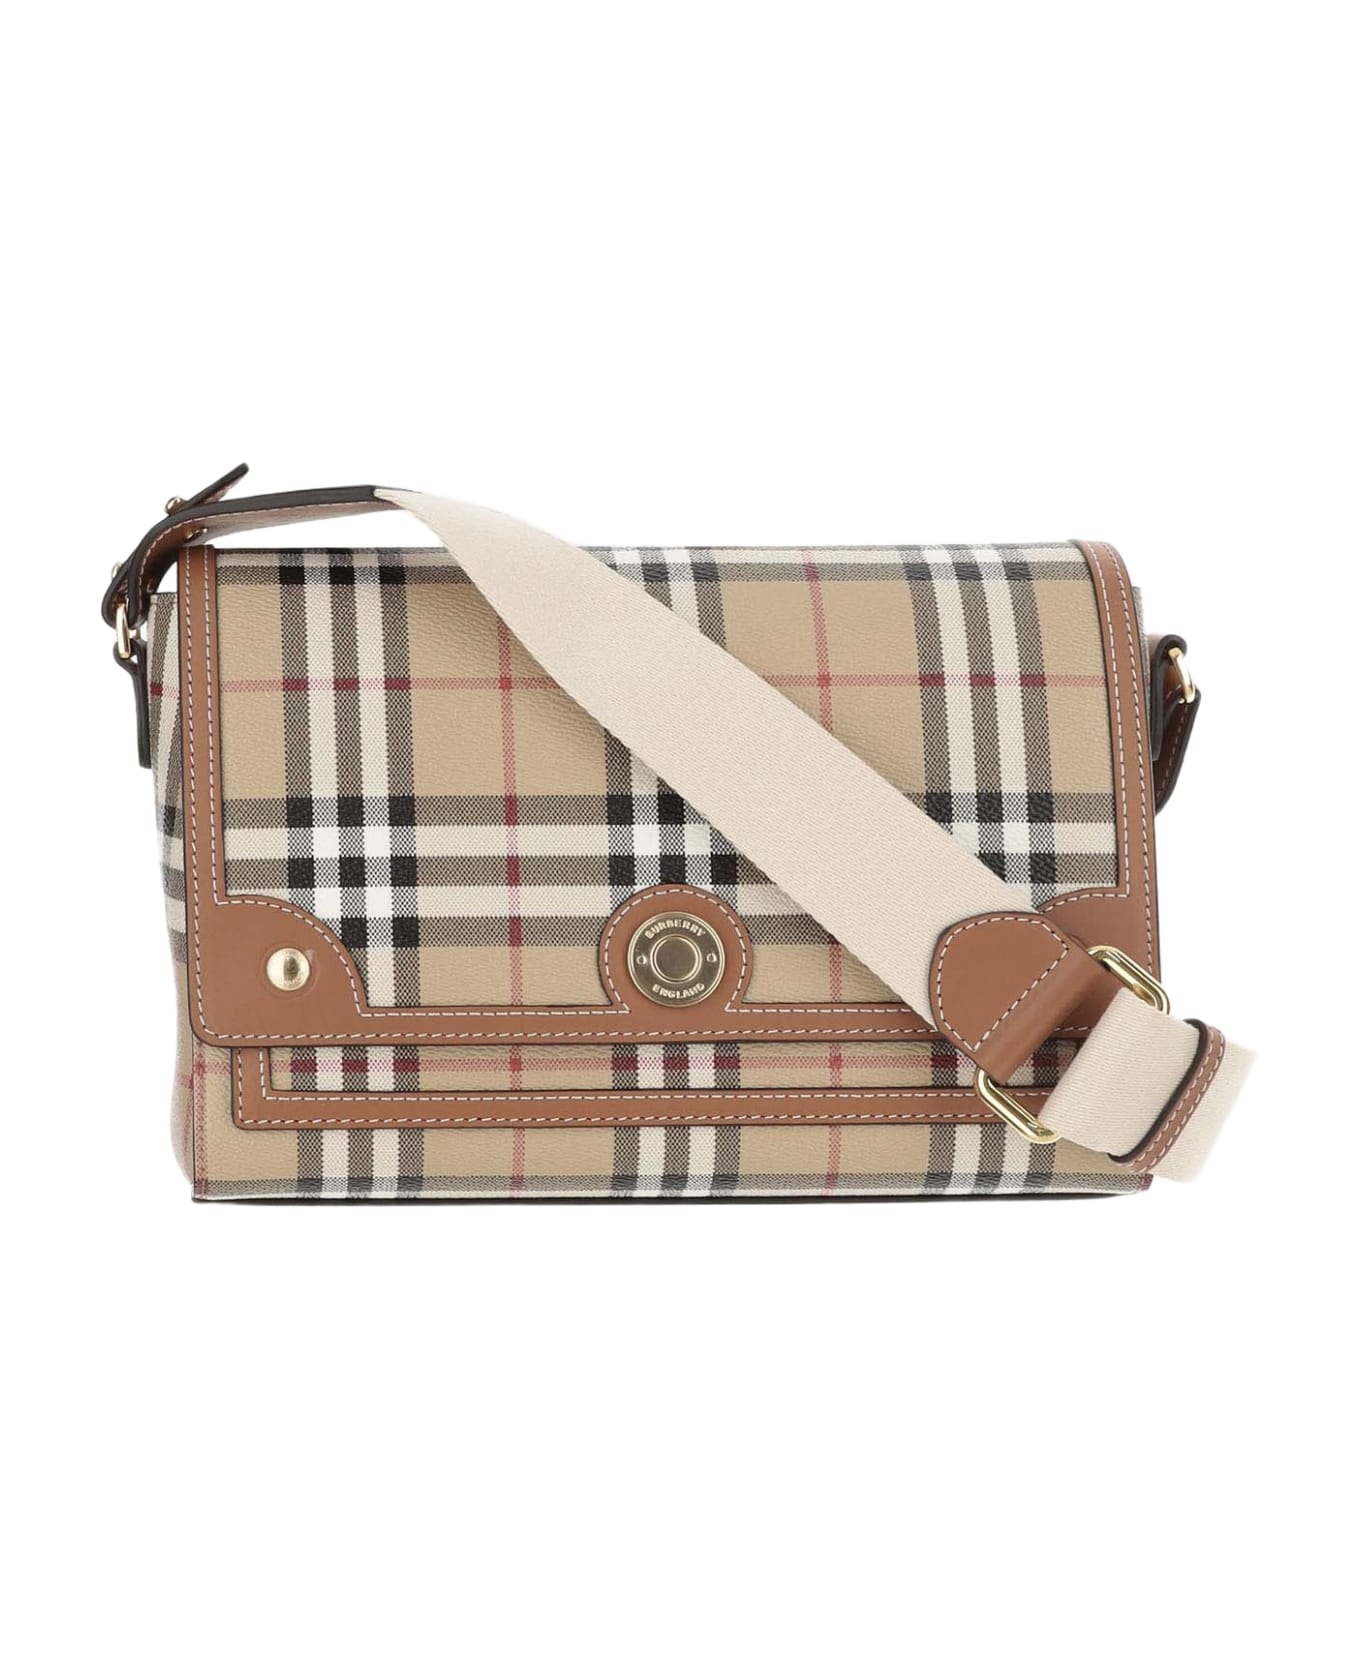 Burberry Bag With Check Pattern - Red ショルダーバッグ